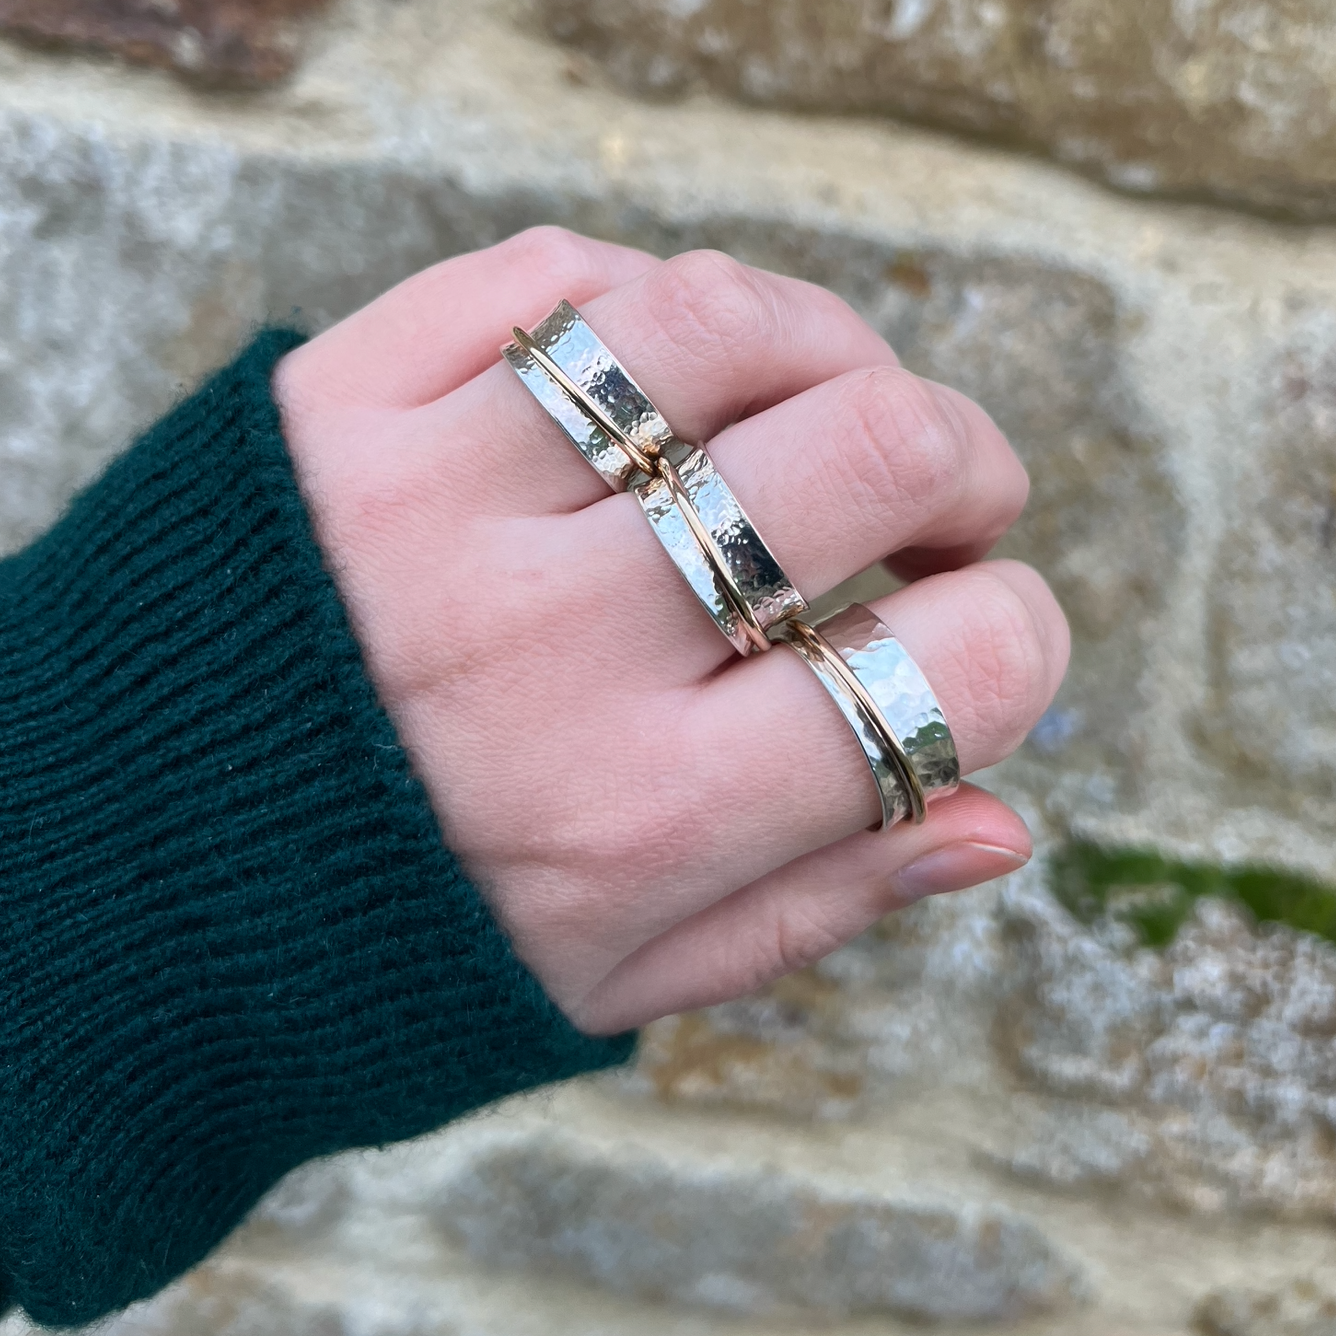 Three sterling silver spinner rings with one gold band.